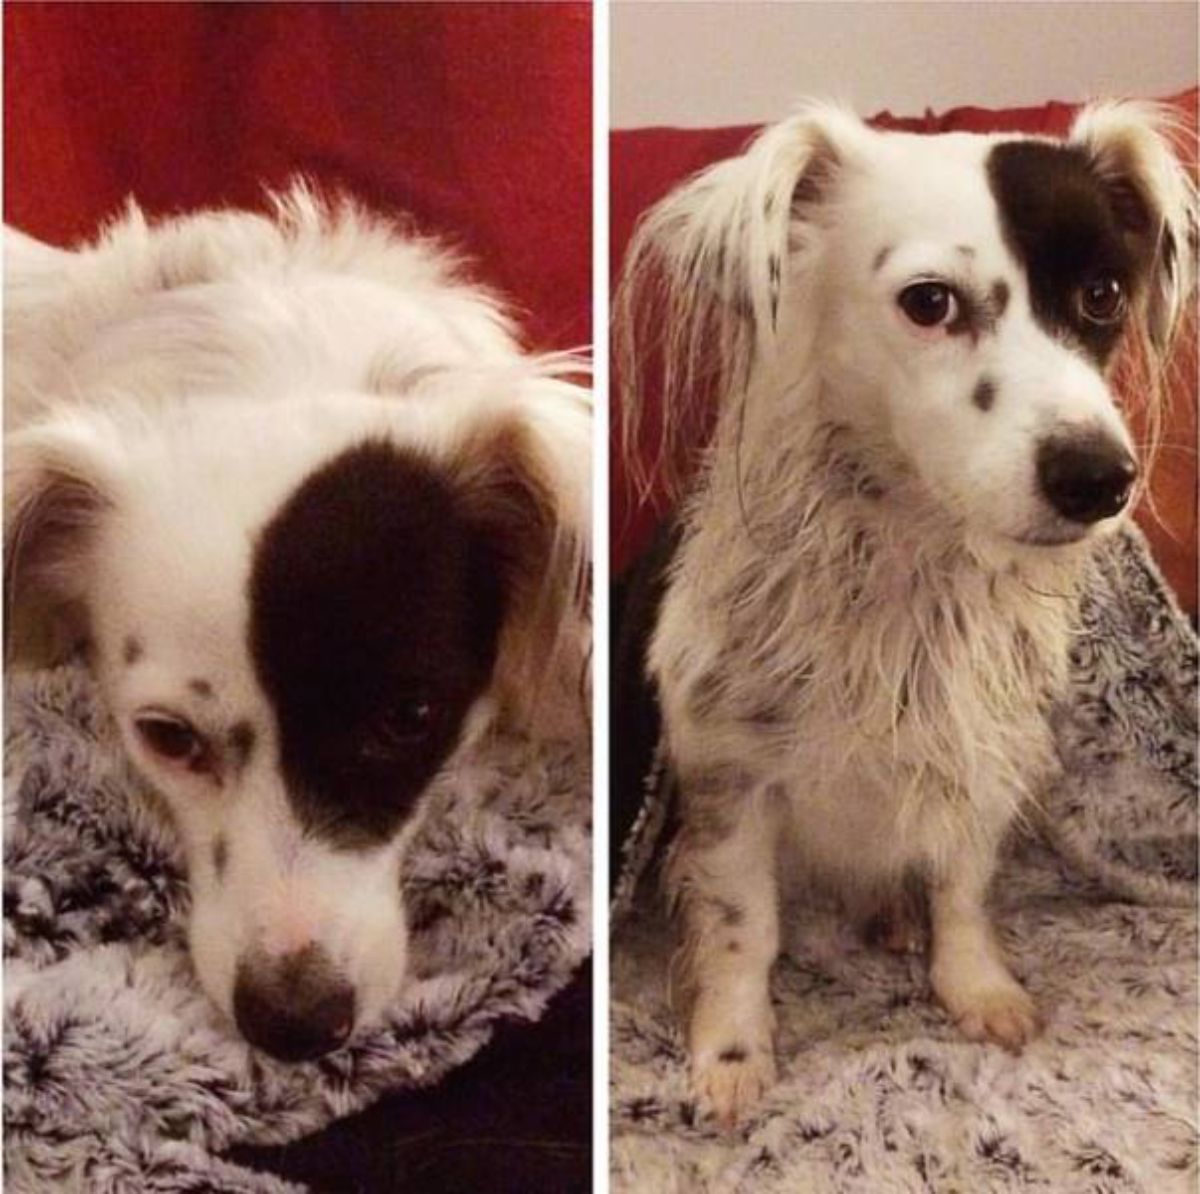 1 photo of black and white dog and 1 photo of the same dog wet